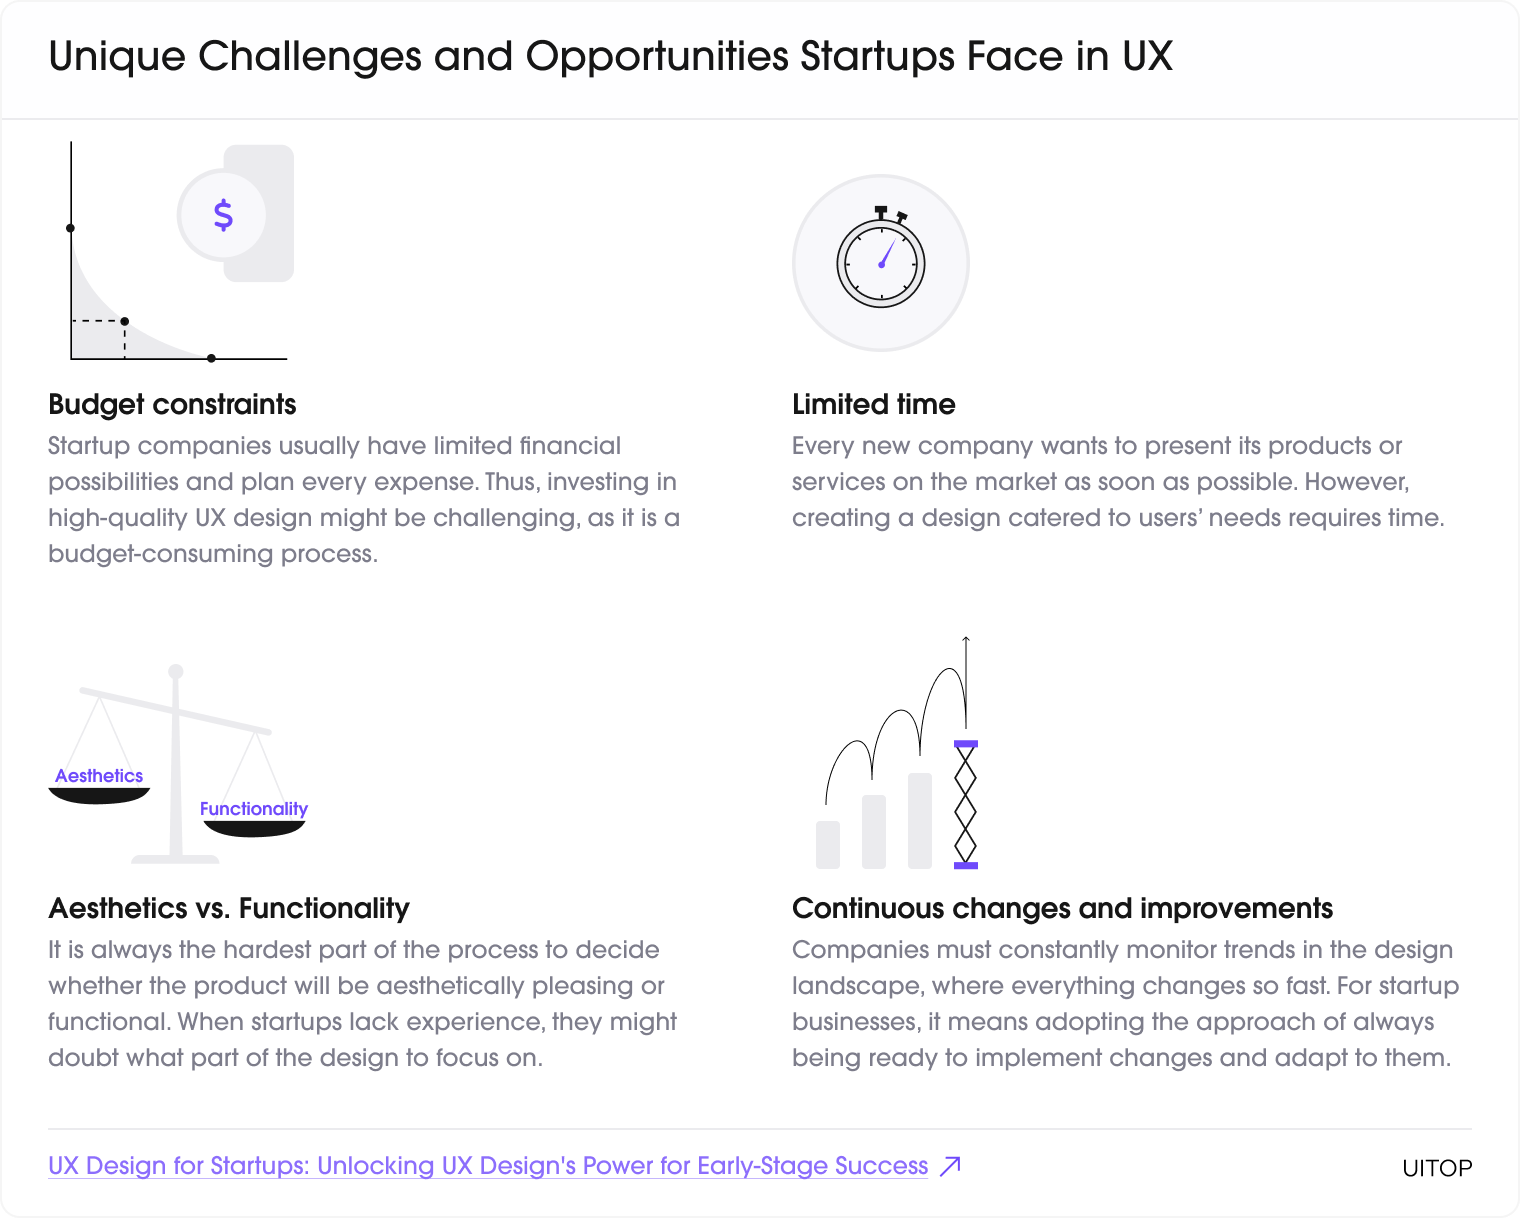 Challenges and opportunities startups face in UX